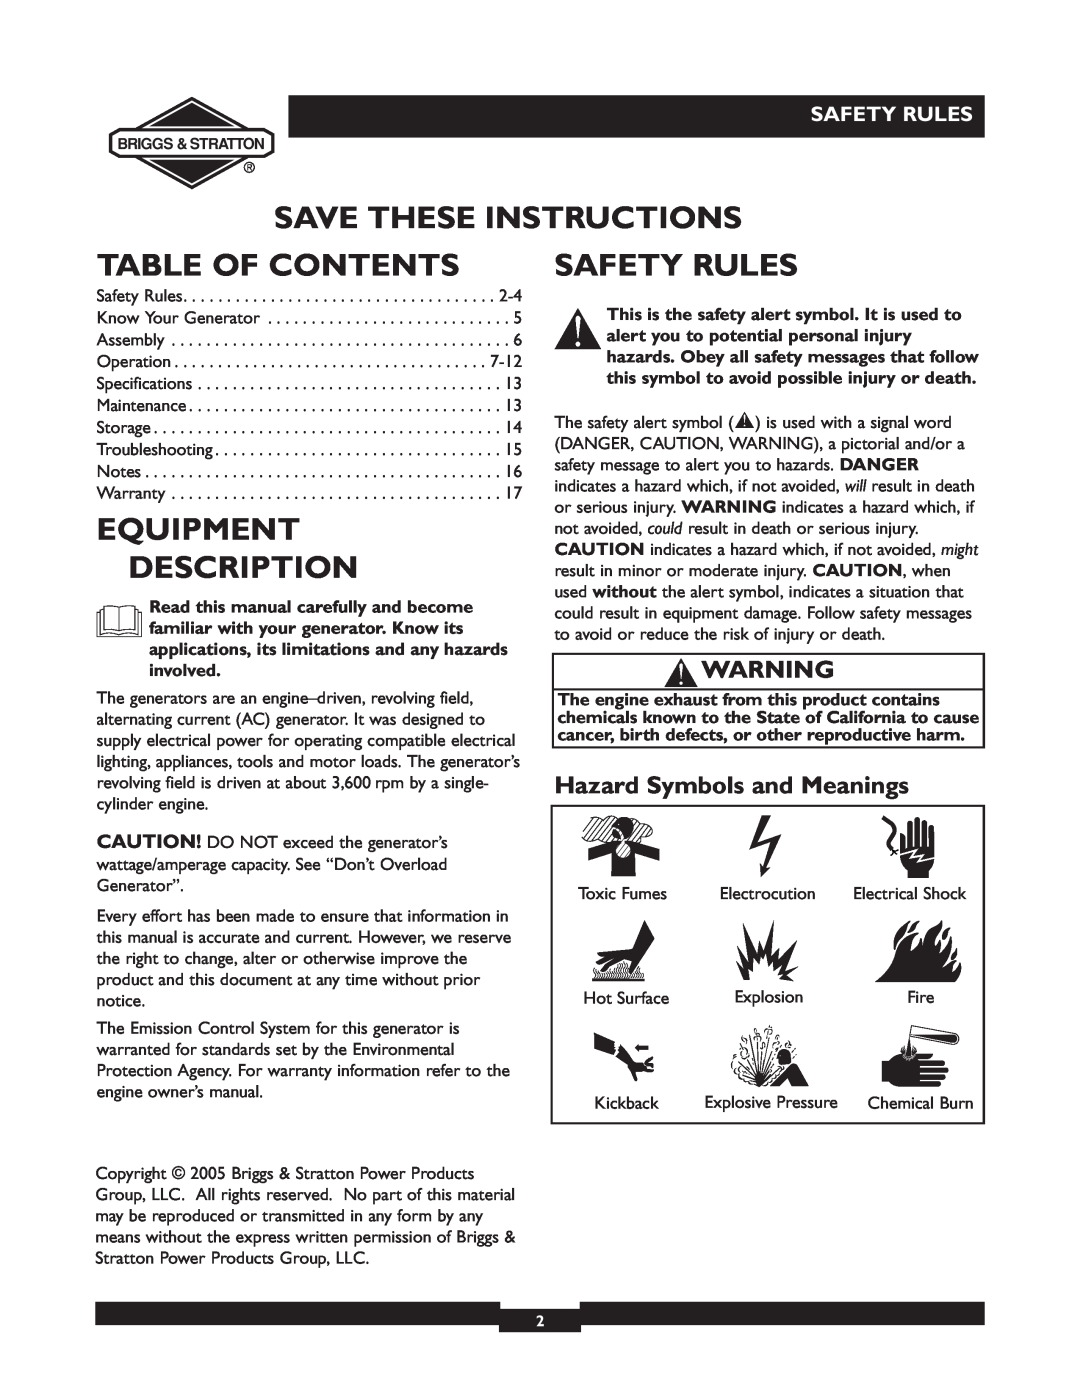 Briggs & Stratton 01532-4 owner manual Save These Instructions, Table Of Contents, Equipment Description, Safety Rules 